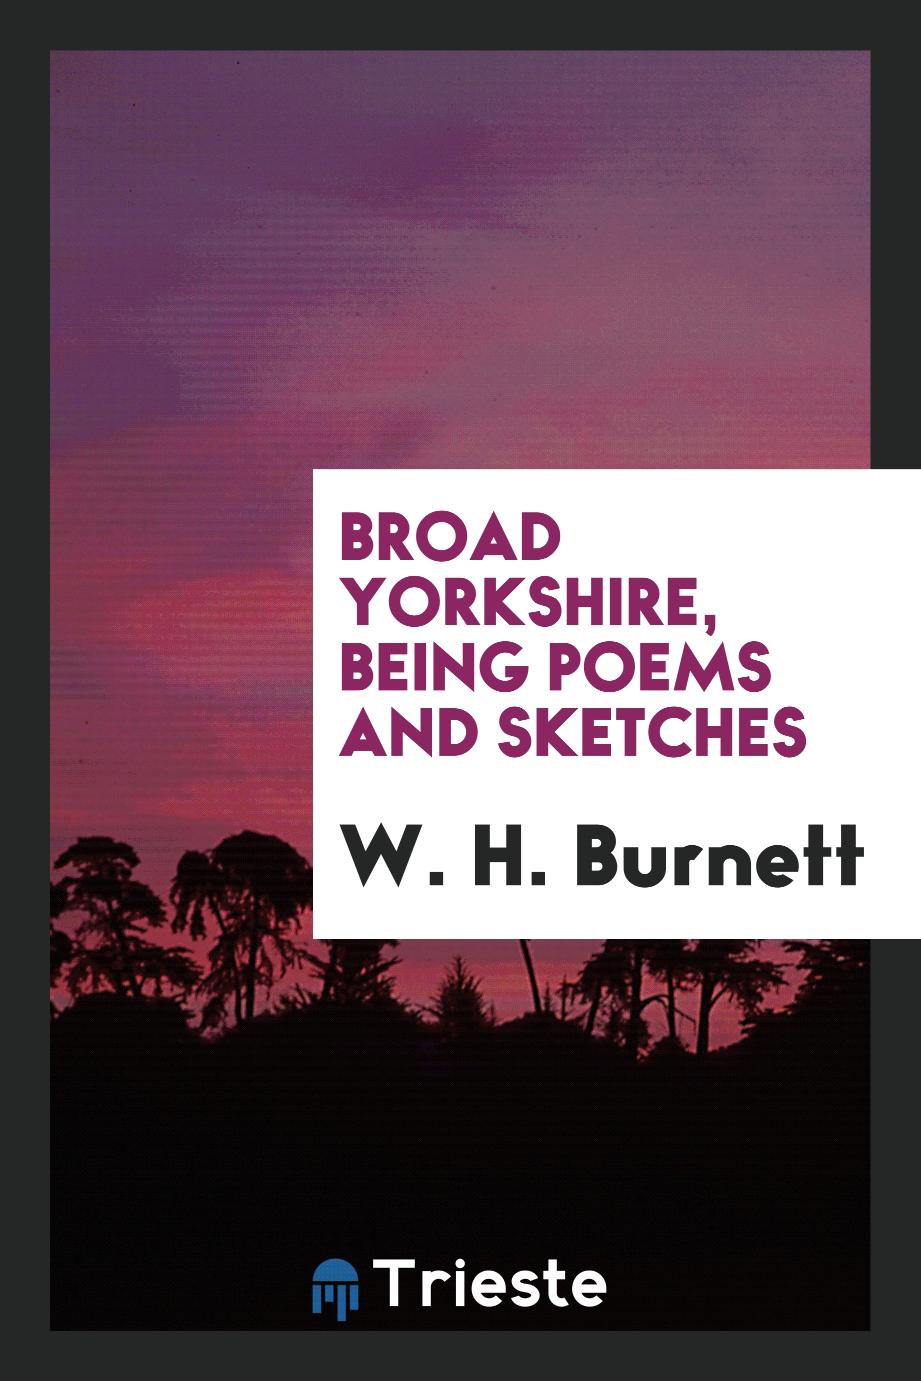 Broad Yorkshire, being poems and sketches